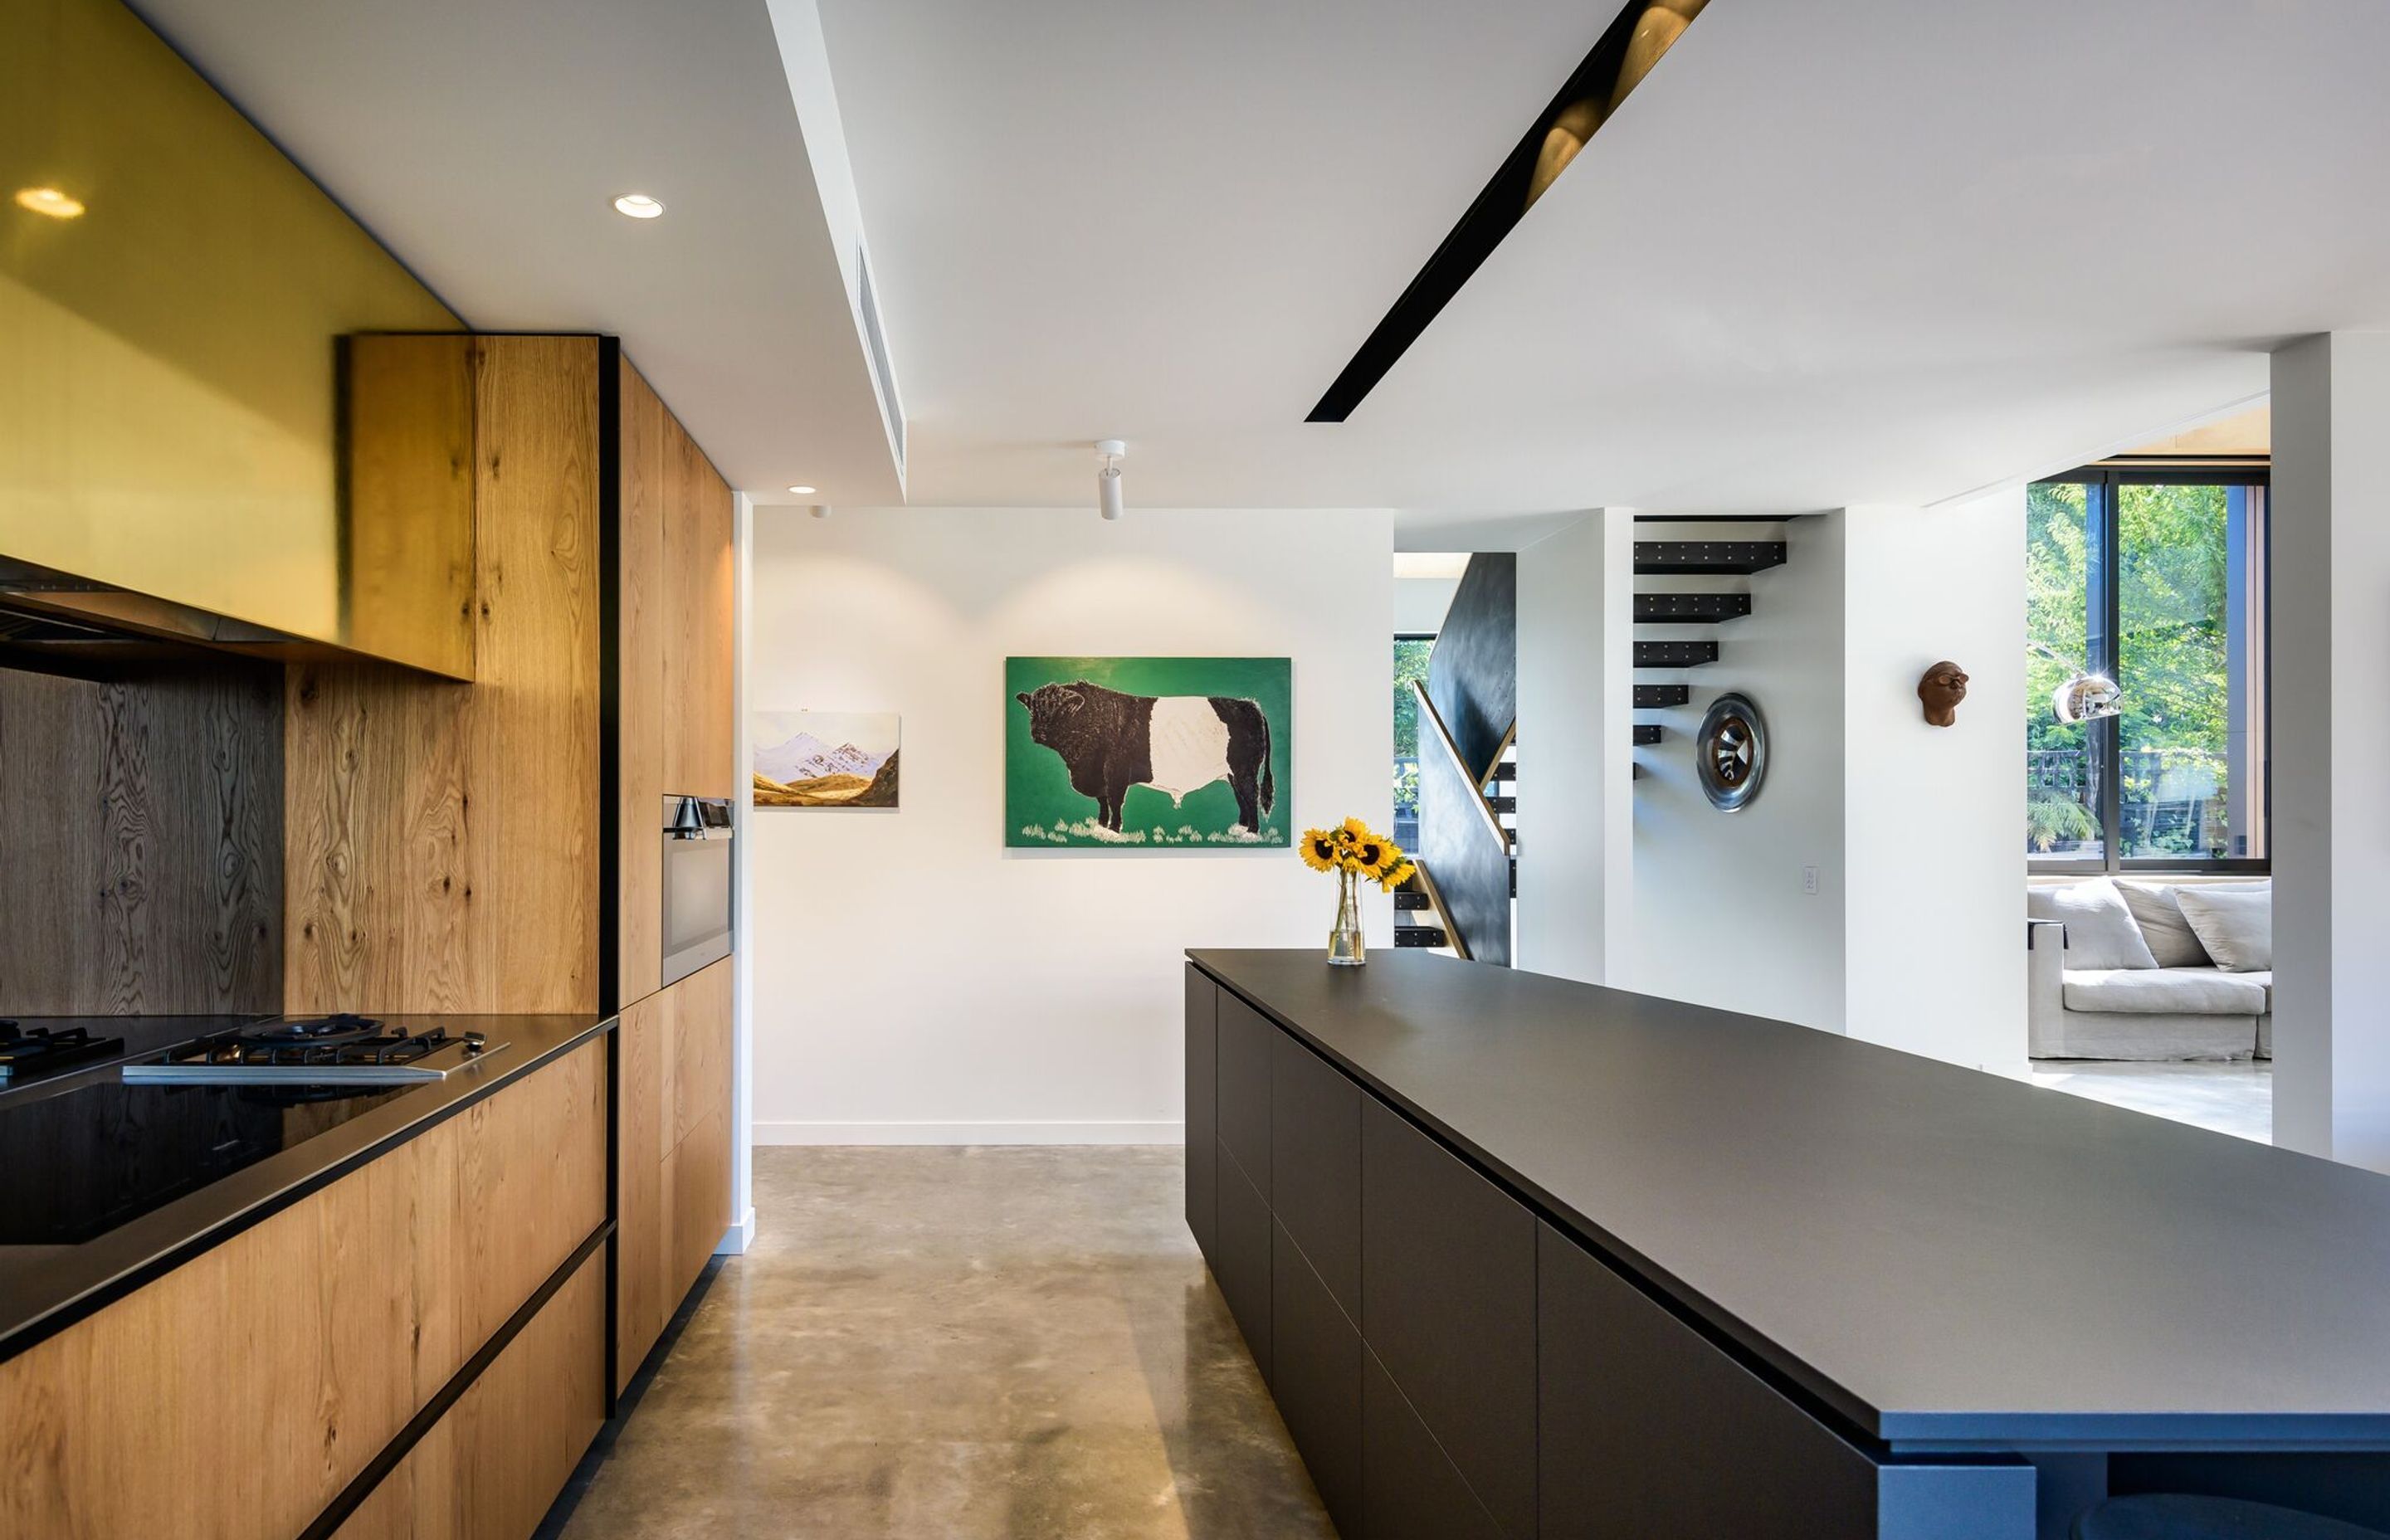 The long kitchen island is a sculptural feature of the house that's ideal for making longer lengths of pasta, says the architect and homeowner Tim Dagg.